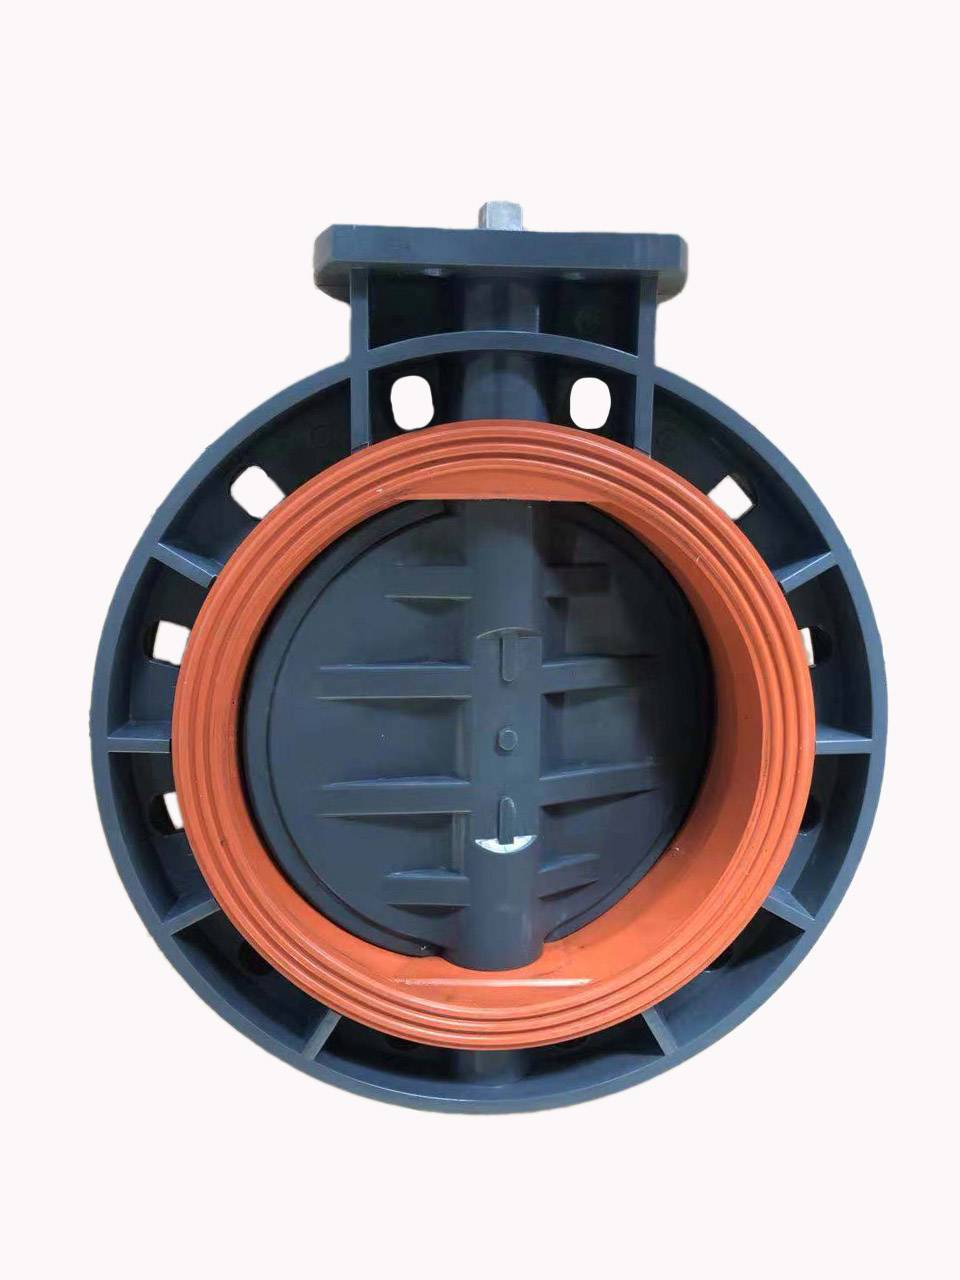 China Supplier Rubber Lining Butterfly Valve - UPVC butterfly valve Square head stem Mounting pad ISO5211 – DA YU PLASTIC